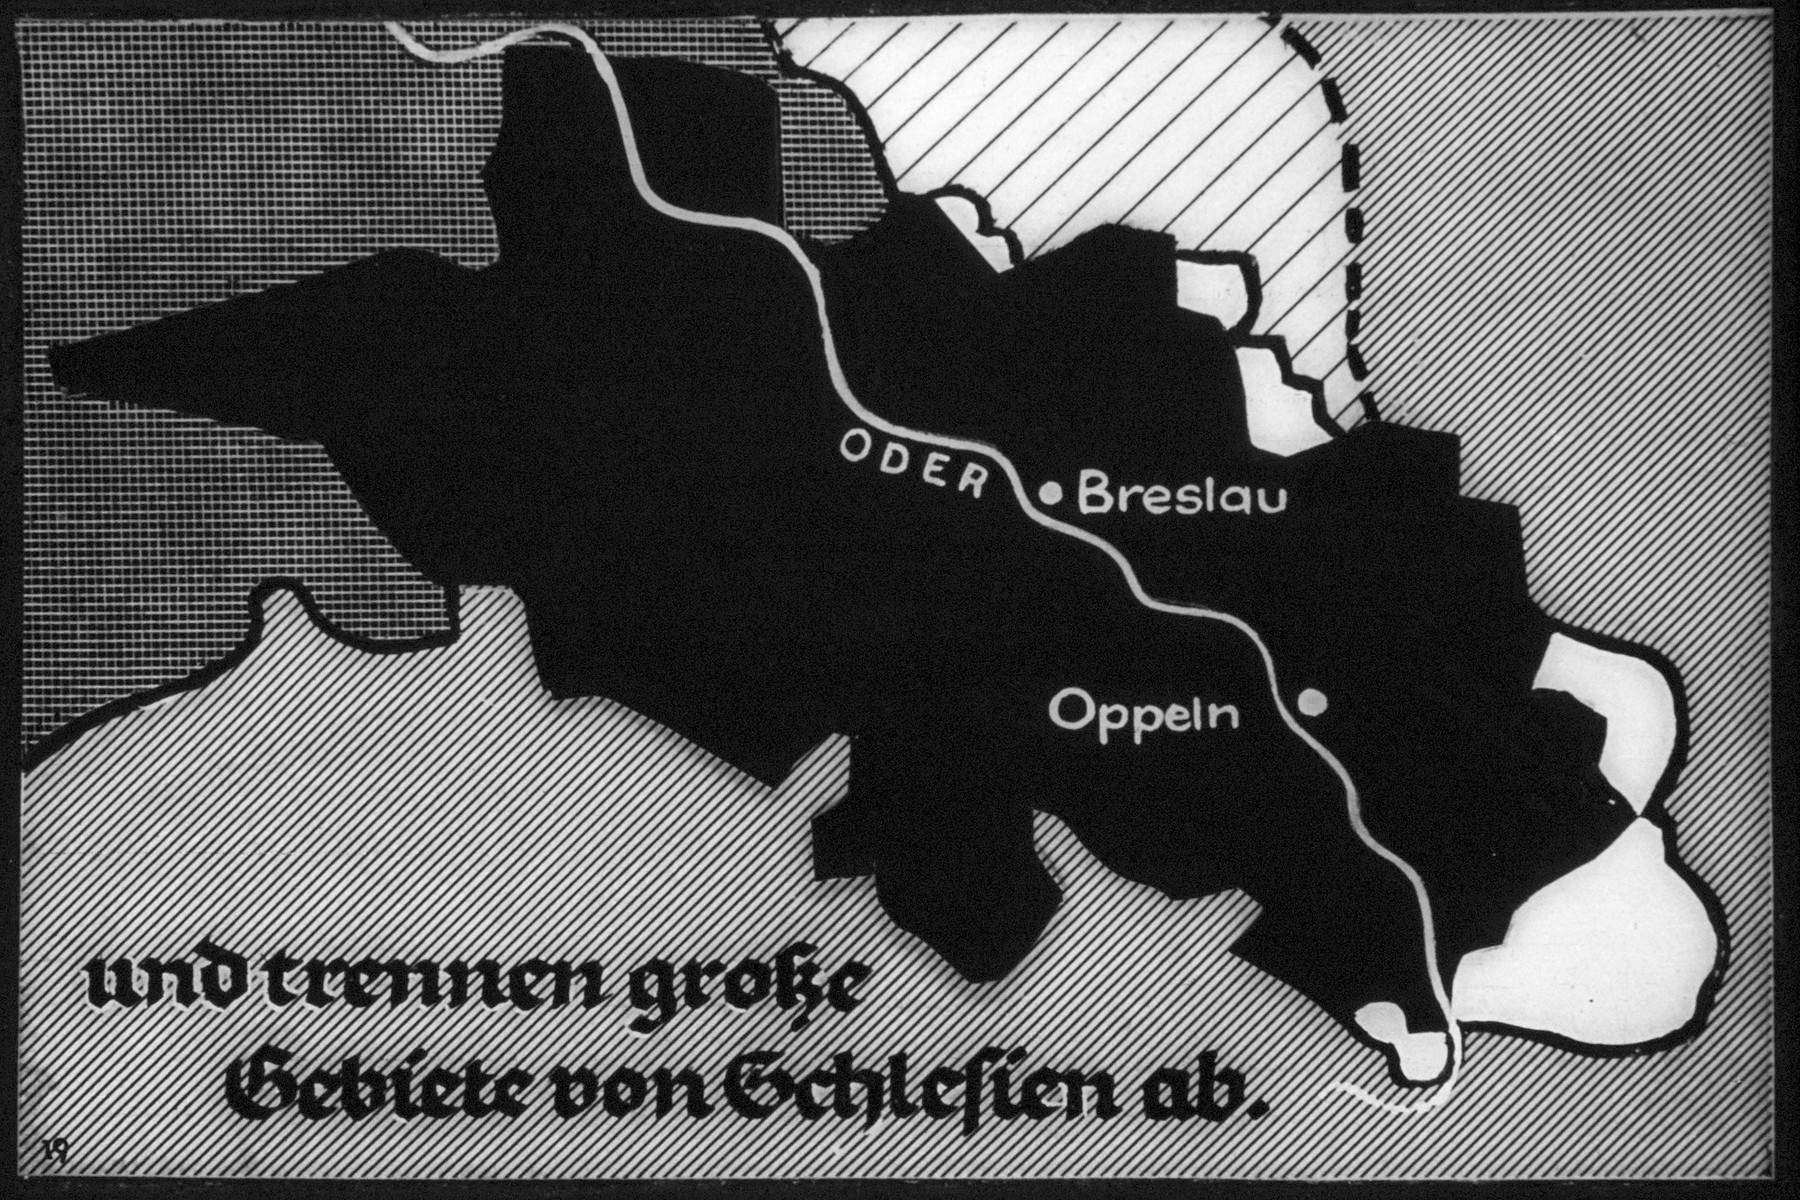 20th Nazi propaganda slide from Hitler Youth educational material titled "Border Land Upper Silesia."

und trennen grosse Gebiete von Schlesien ab.
//
and separate large areas of Silesia.